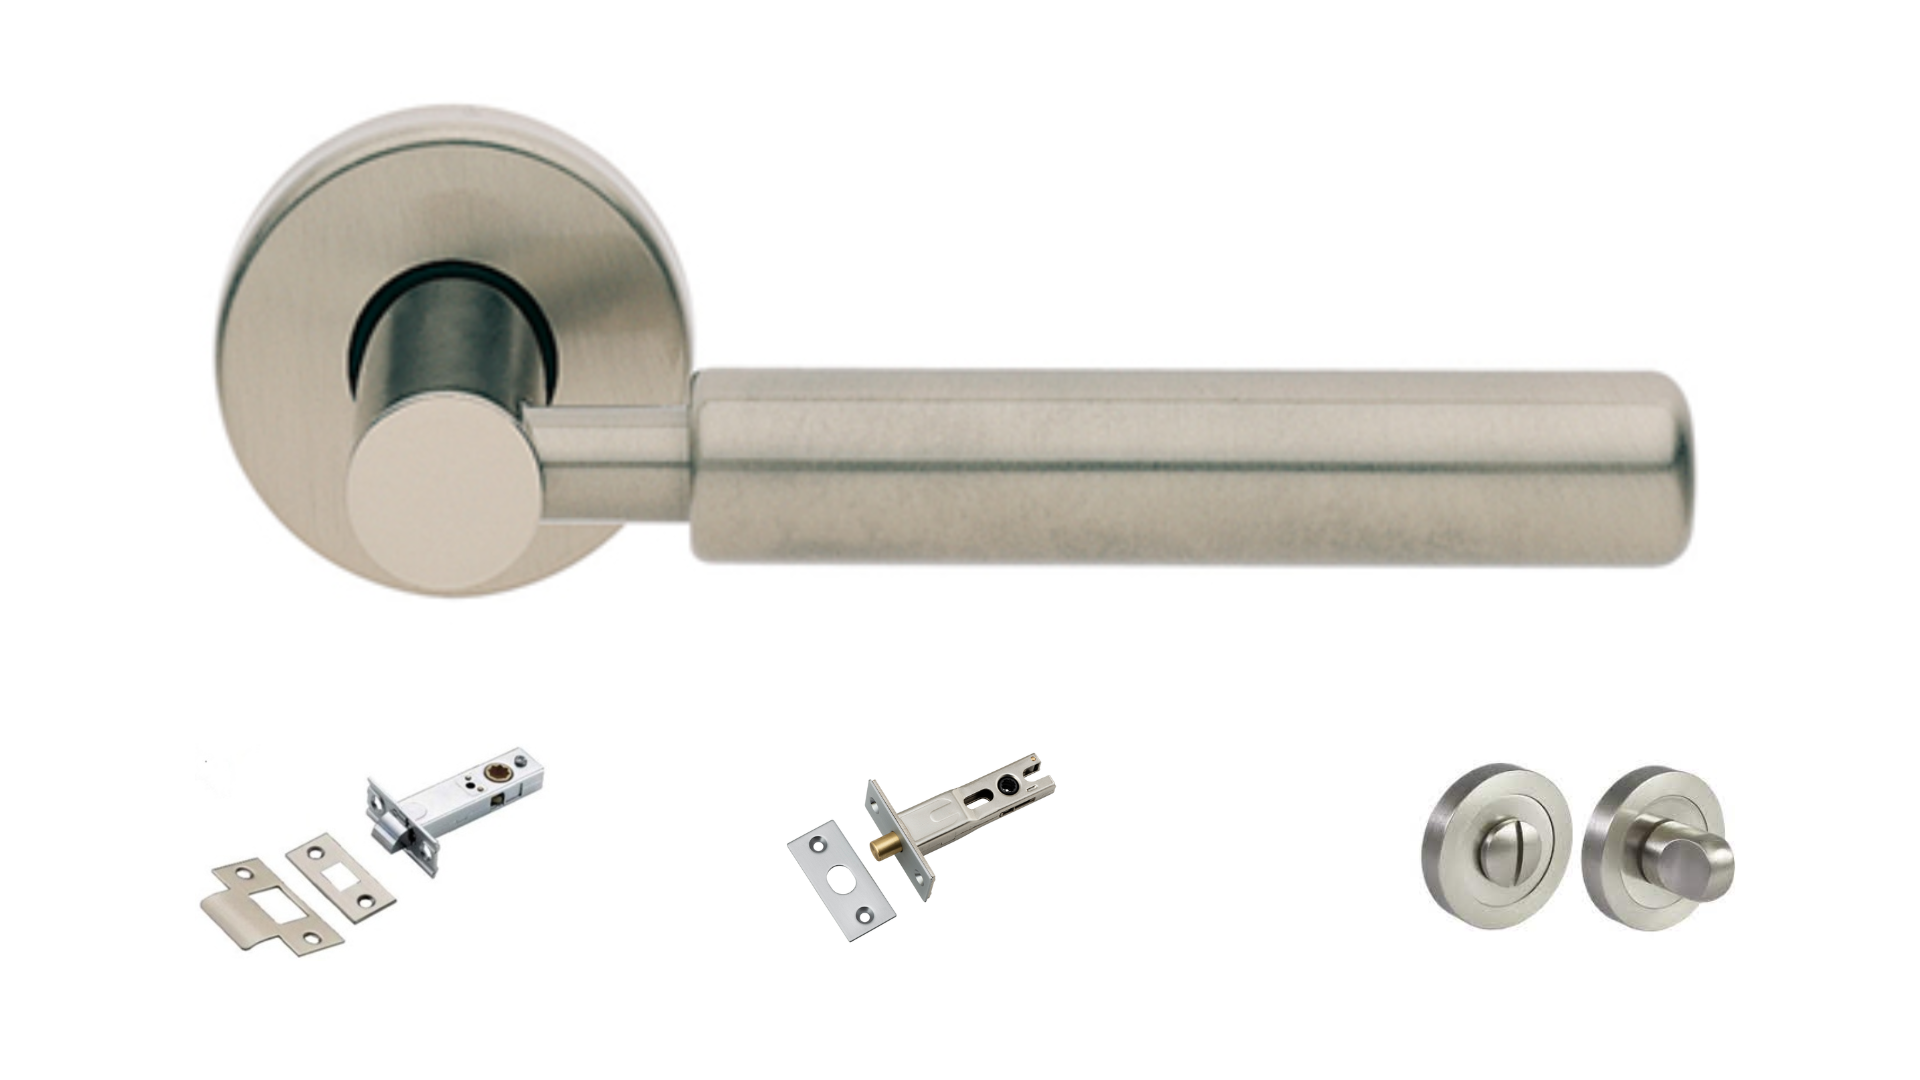 Product picture of the Amletto Satin Nickel Door Handle with accessories tubular latch, privacy turn and release, and a privacy bolt on a white background.